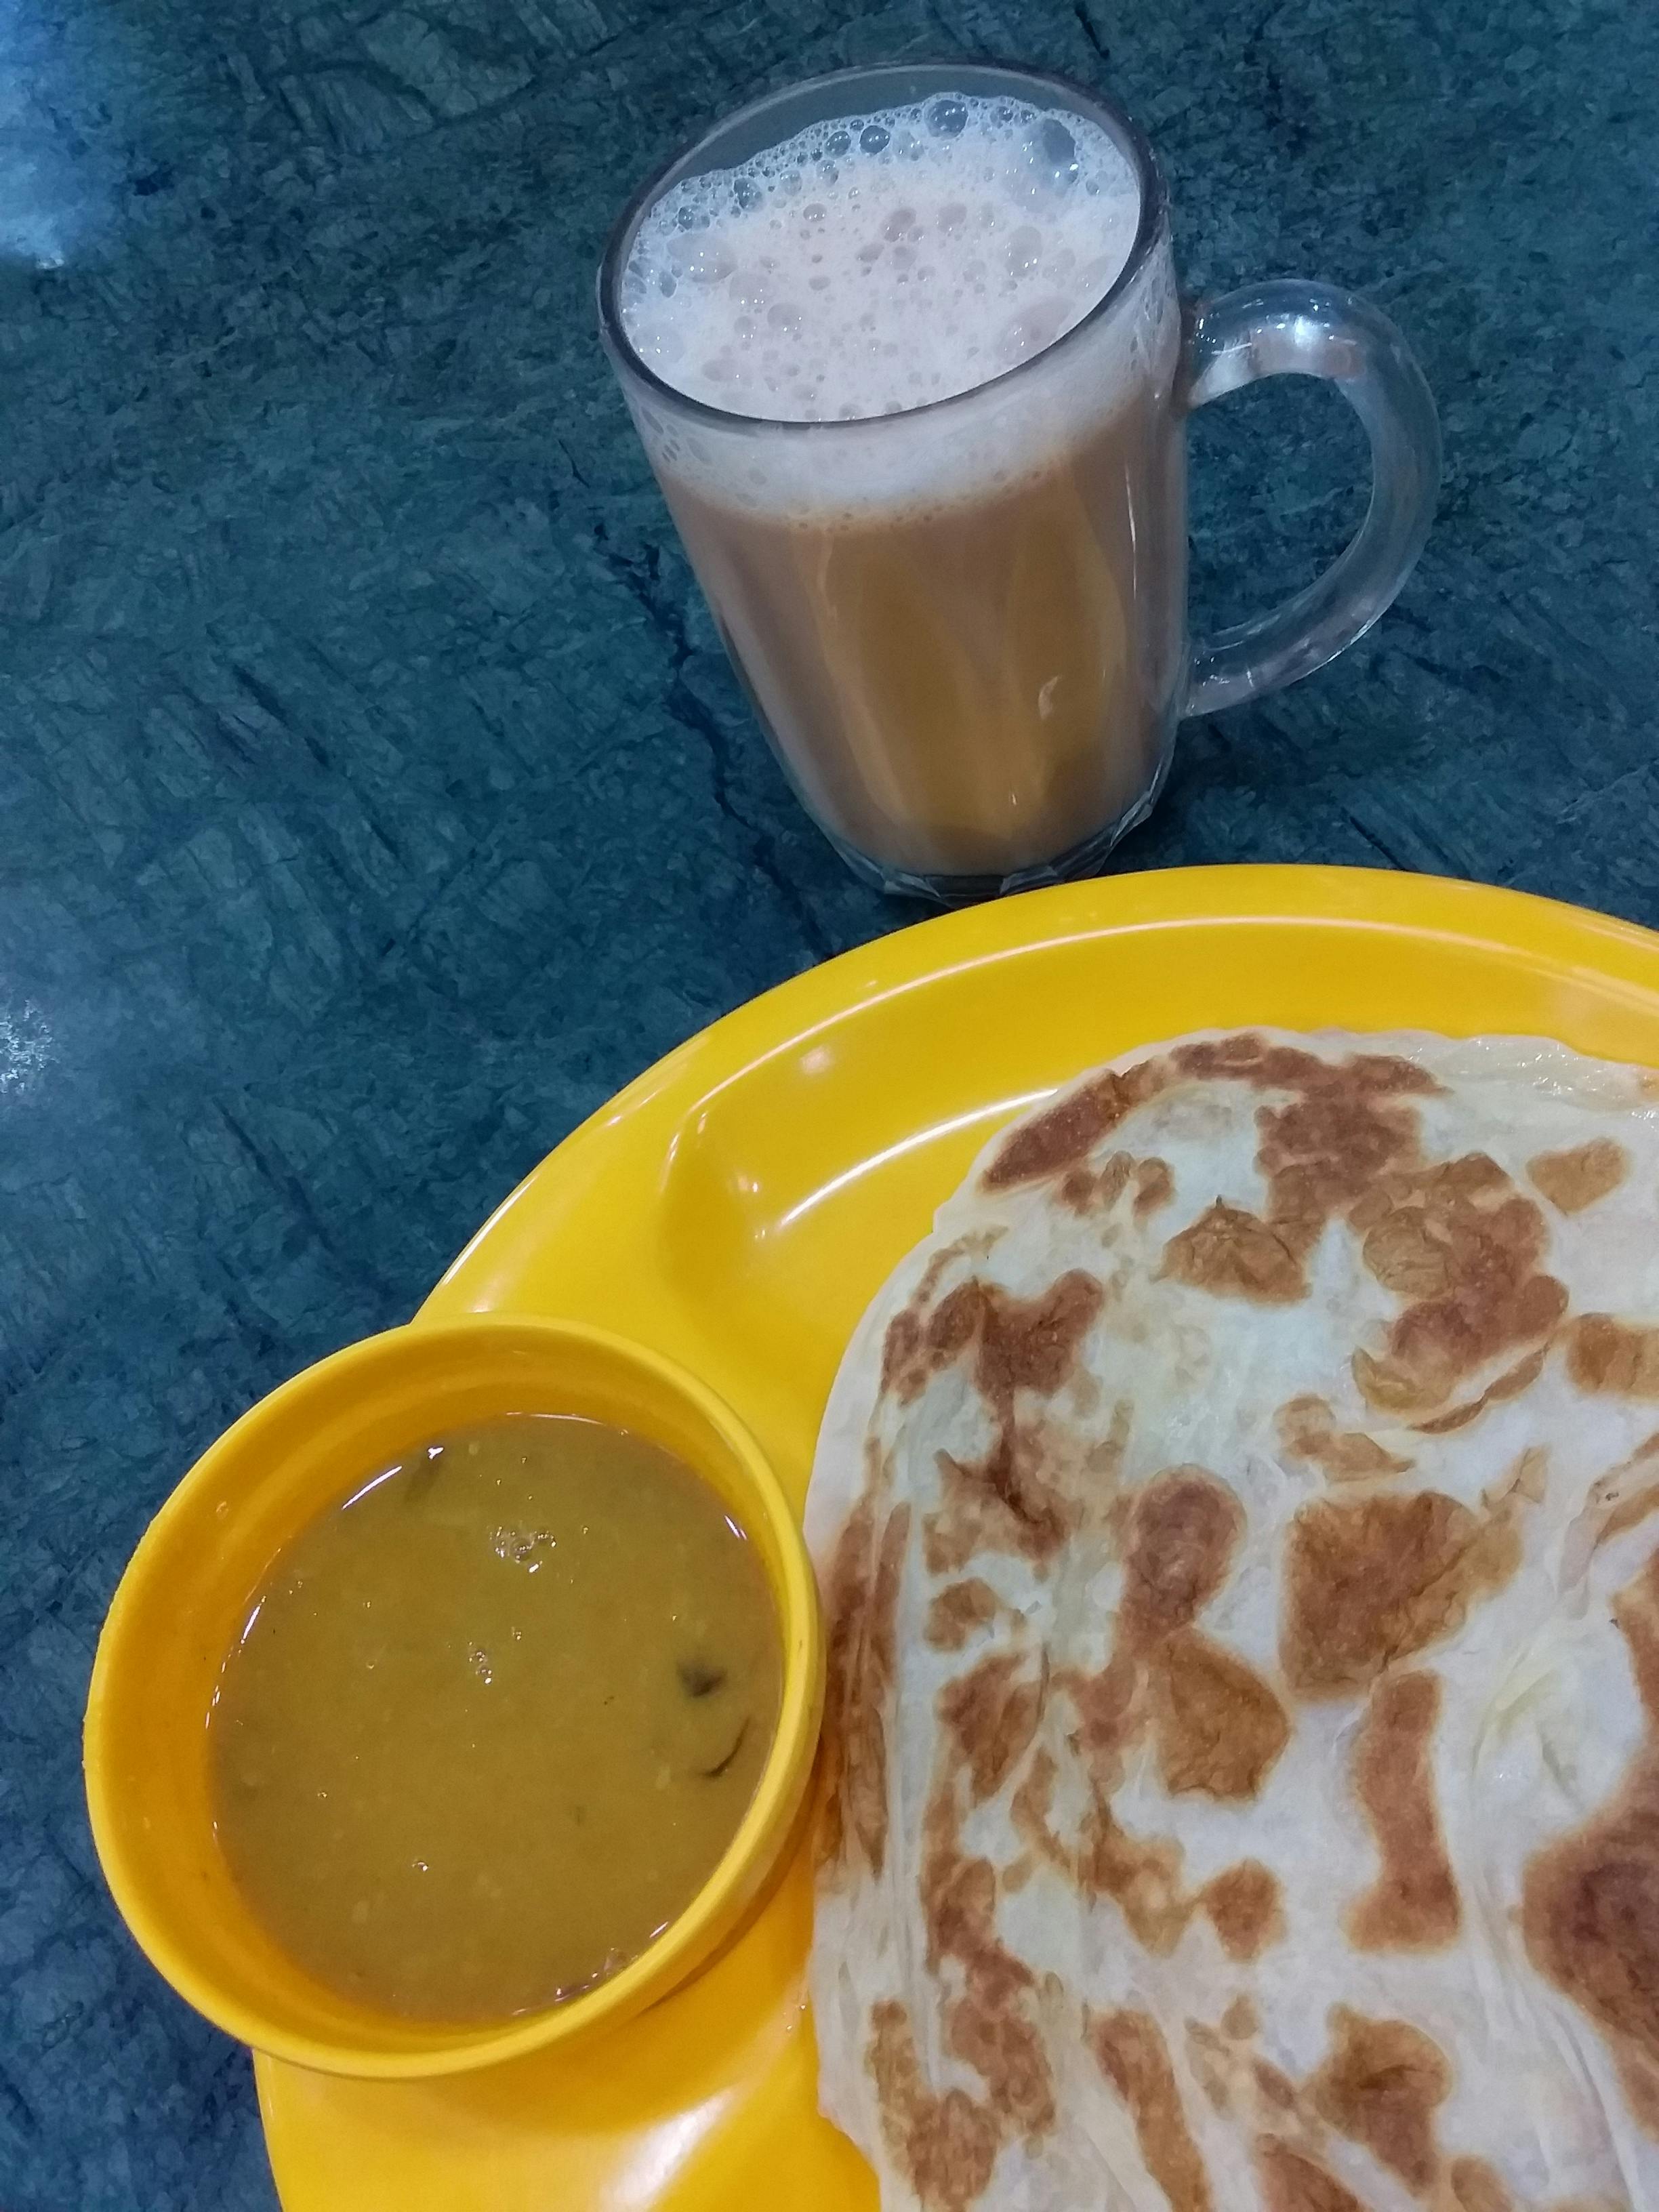 Free stock photo of Roti canai with dial curry and teh ...